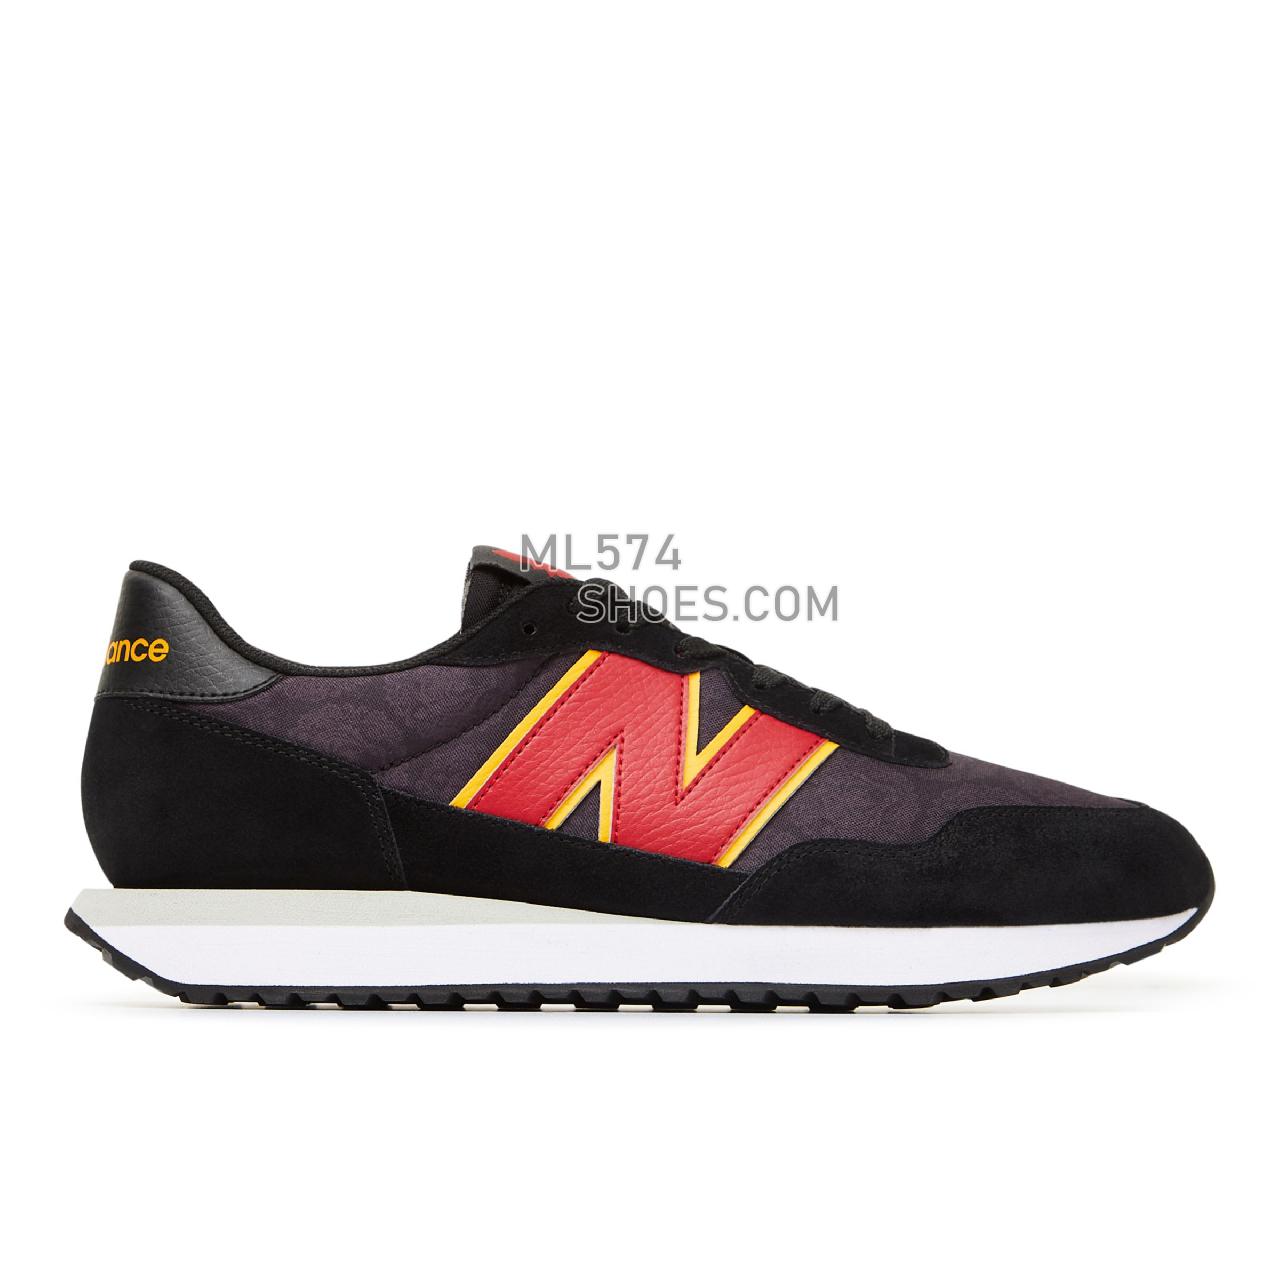 New Balance AS ROMA 237 - Men's Sport Style Sneakers - Black with Red Pepper and Saffron - MS237ASR